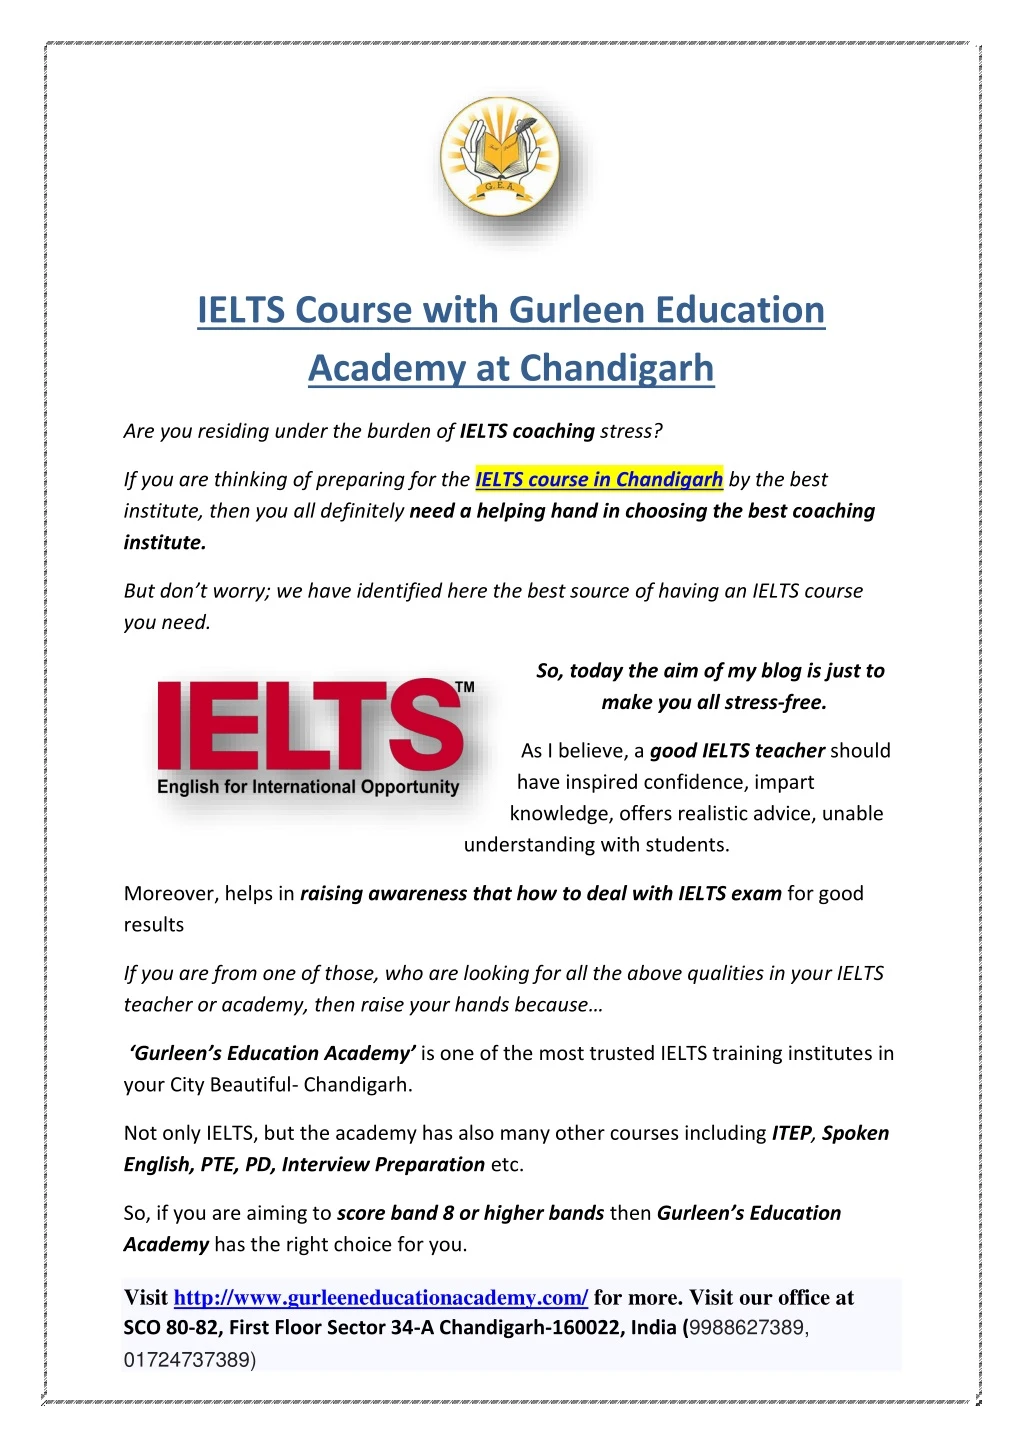 ielts course with gurleen education academy